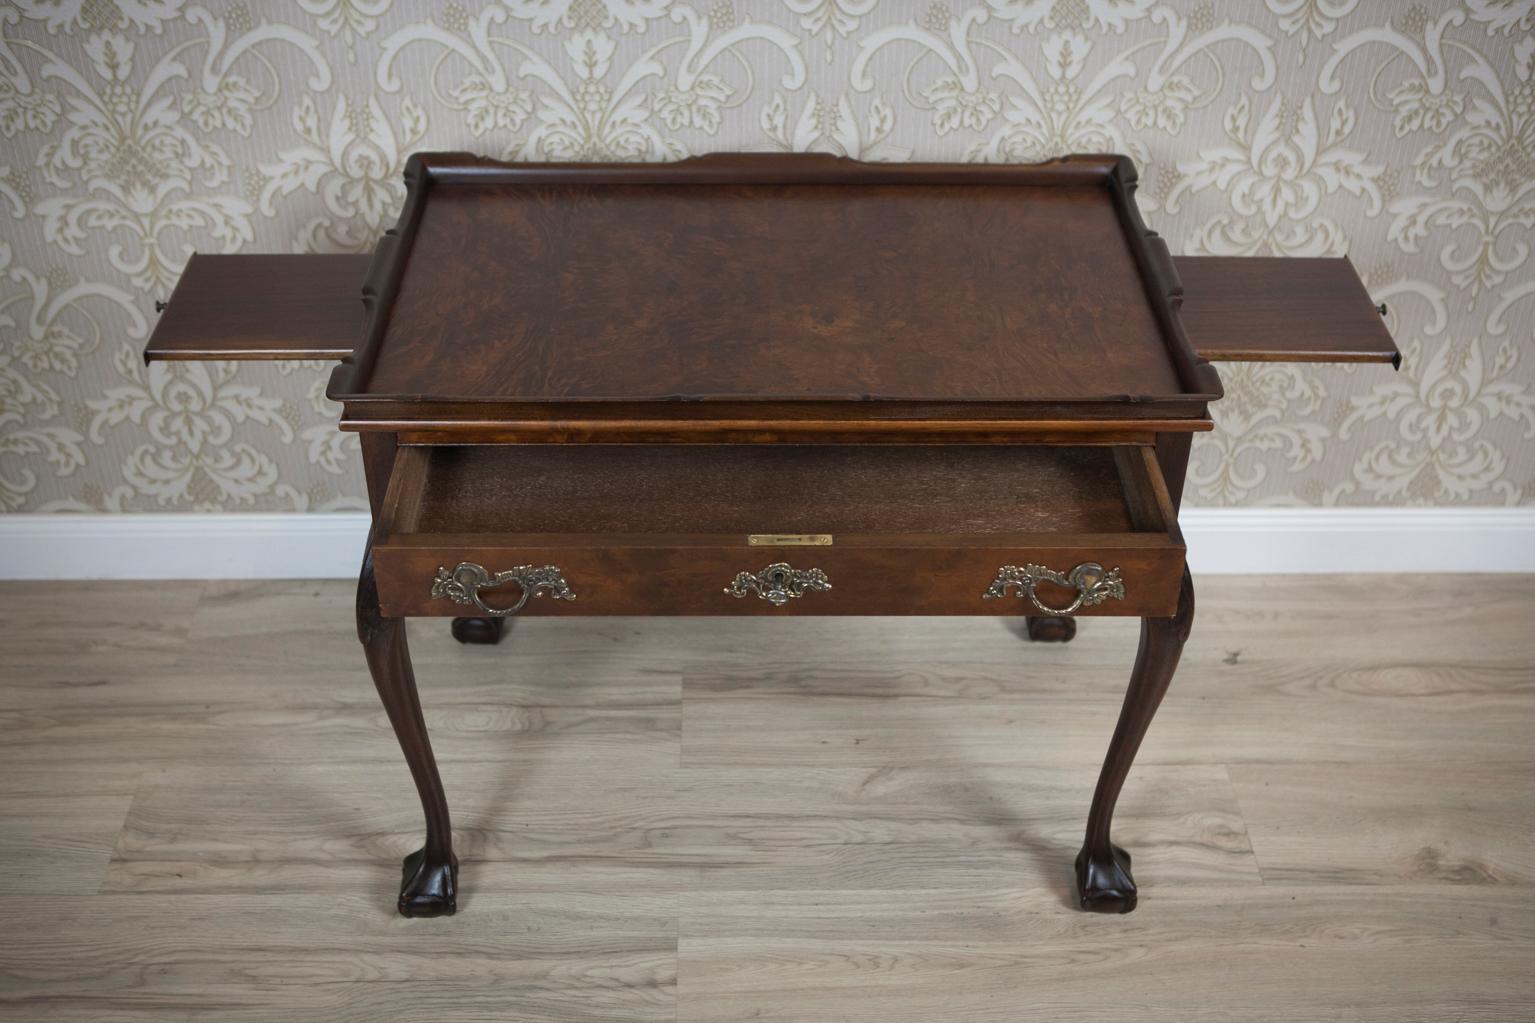 European Wall-Mounted Tea Table in the Chippendale Type, circa 1950 For Sale